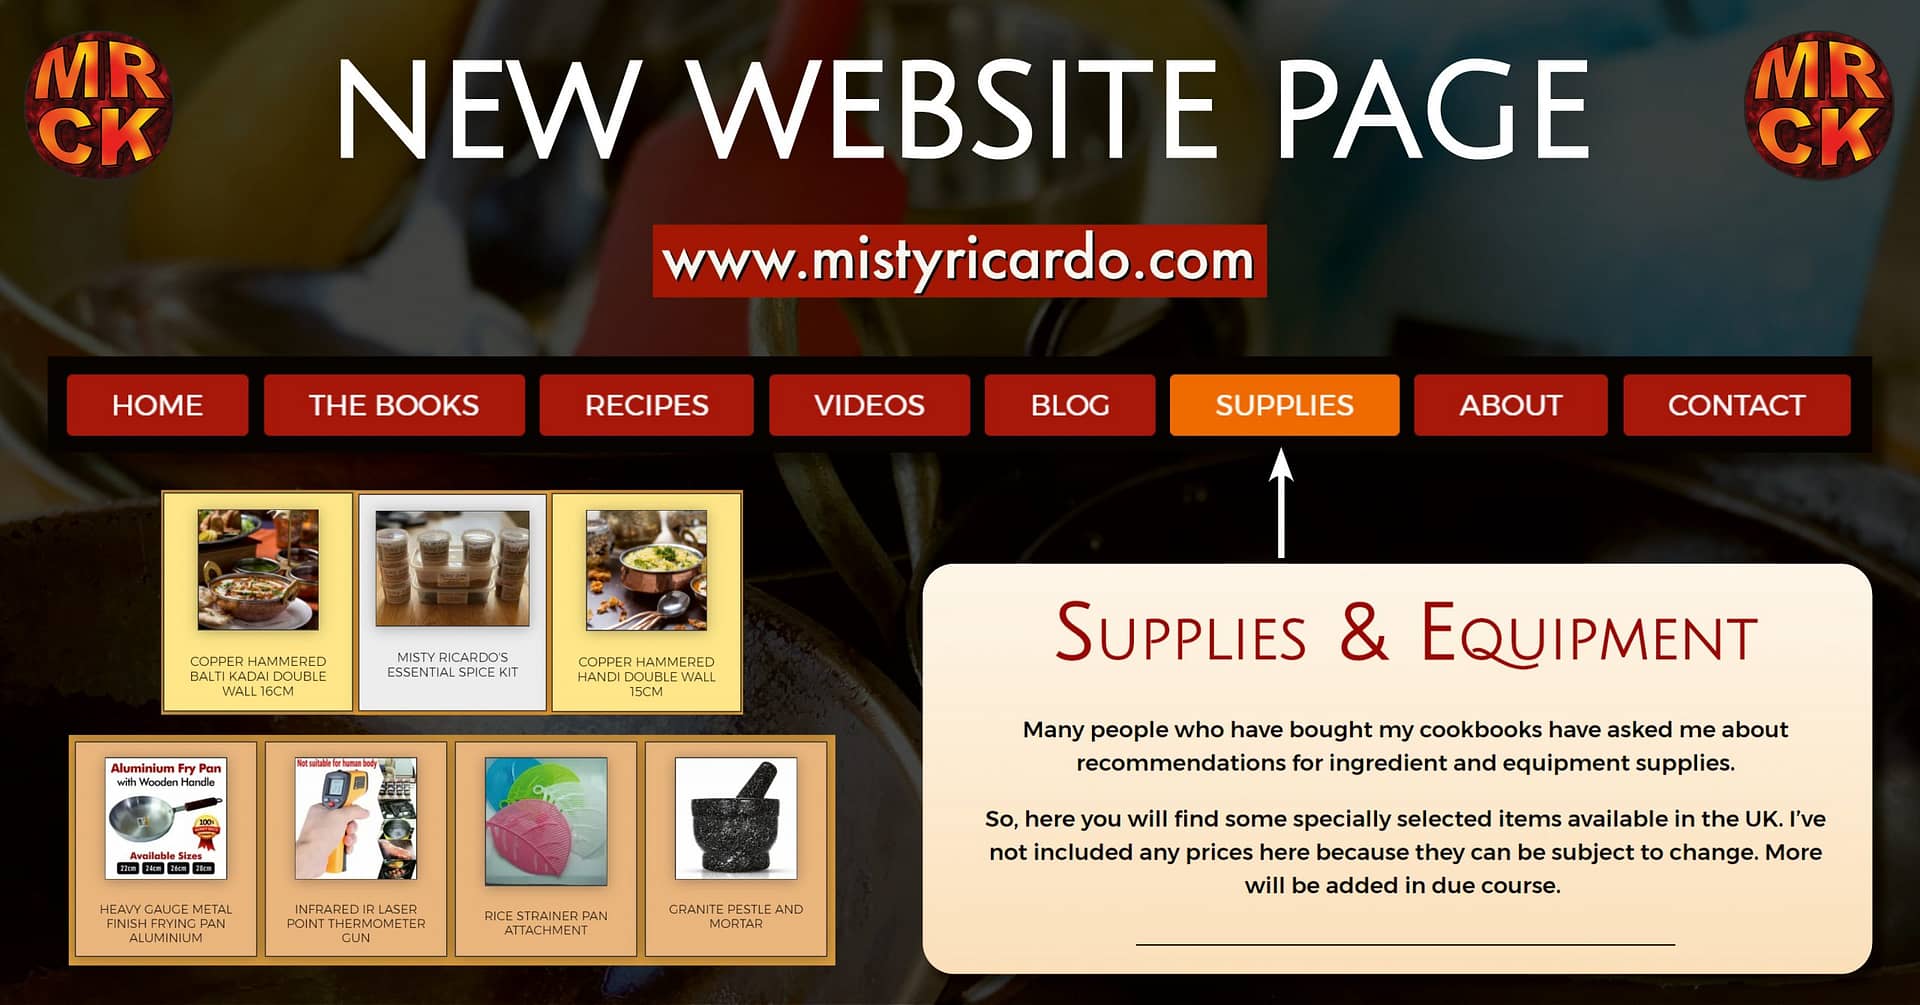 New Website Page Supplies